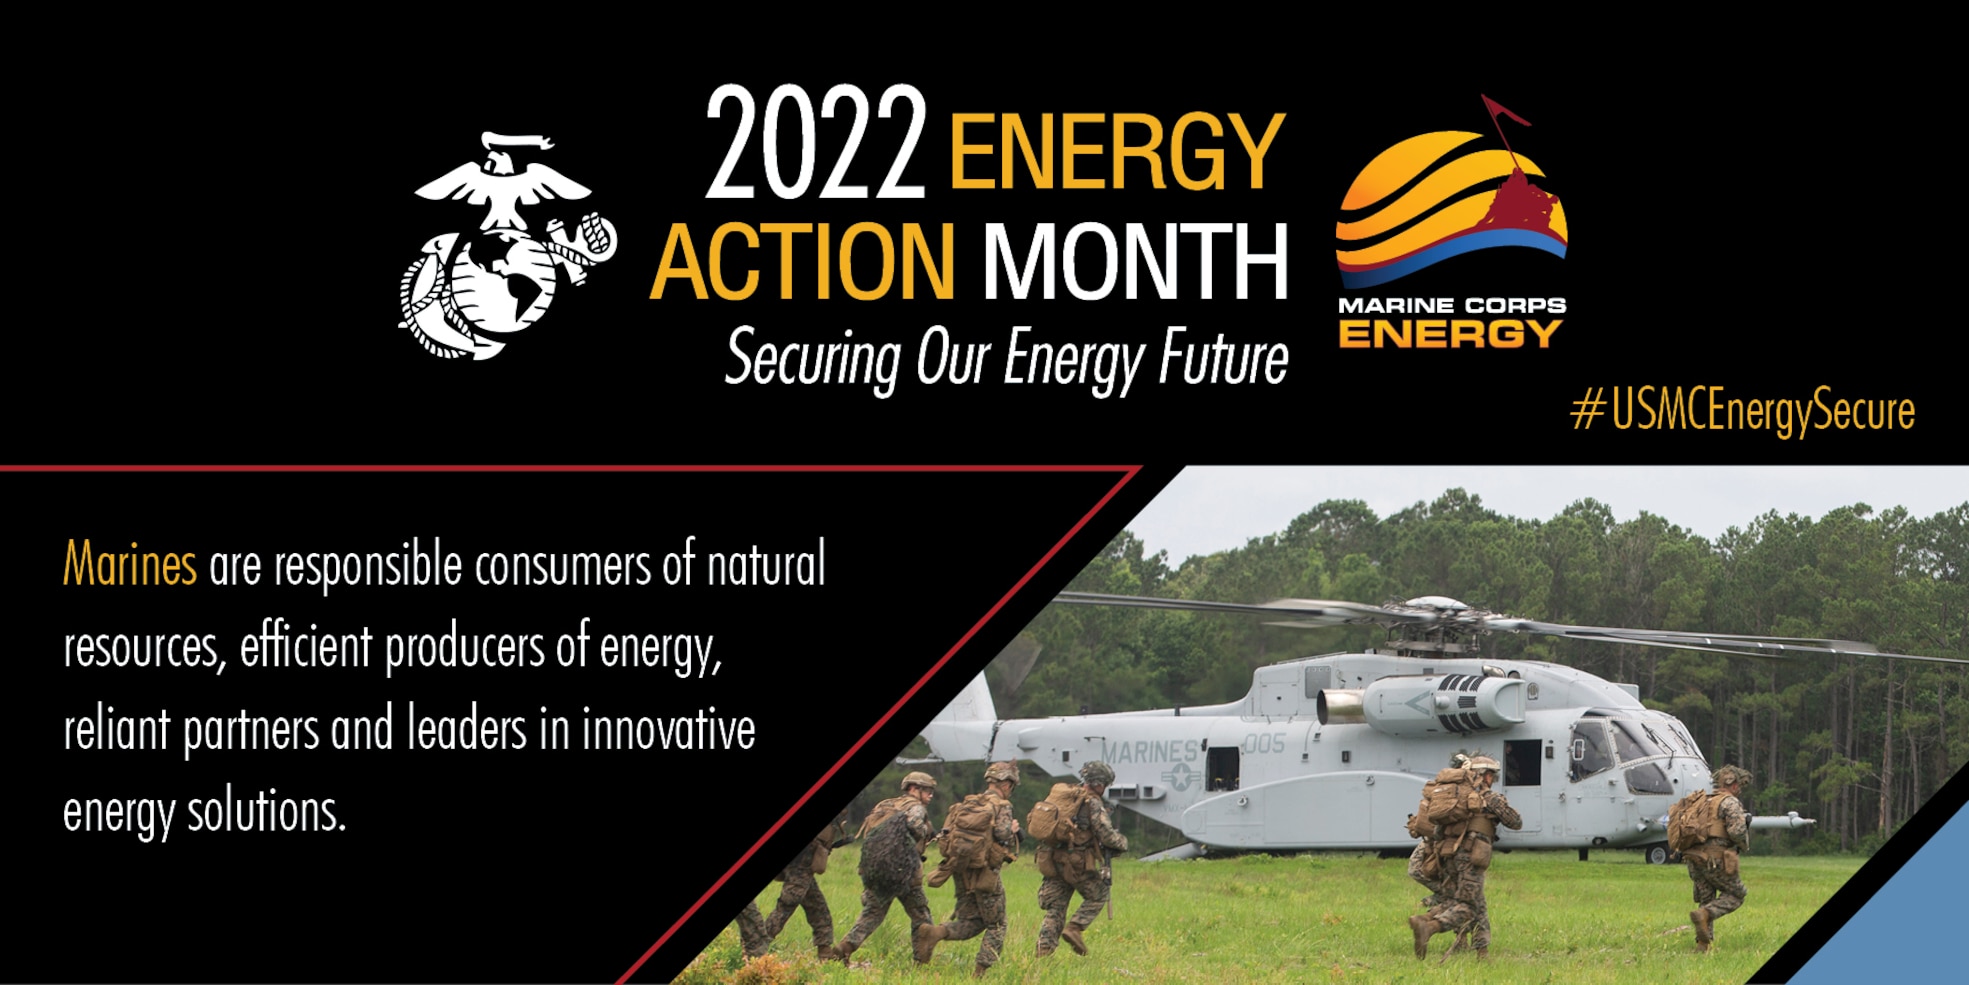 Graphic for the 2022 Energy Action month with a photo of Marines running towards a landed helicopter on the grass.